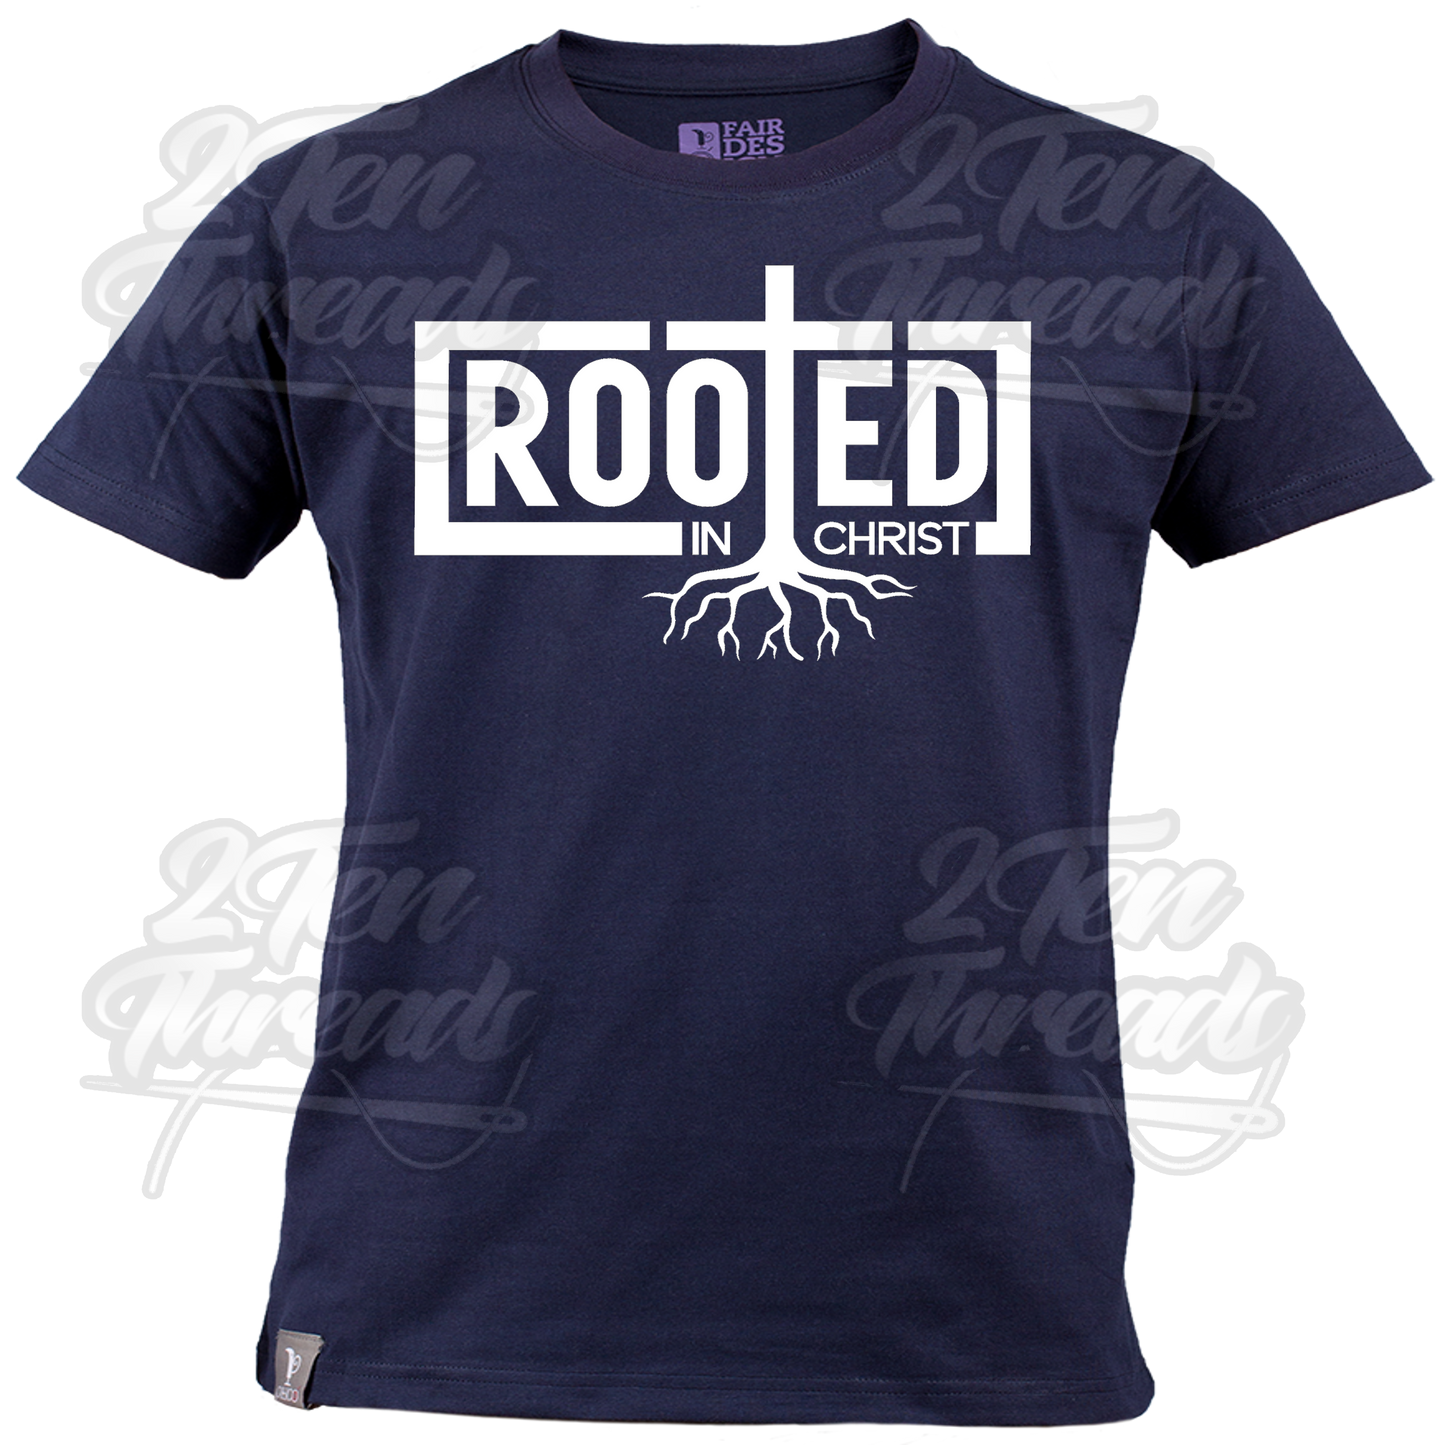 Rooted in Christ Shirt